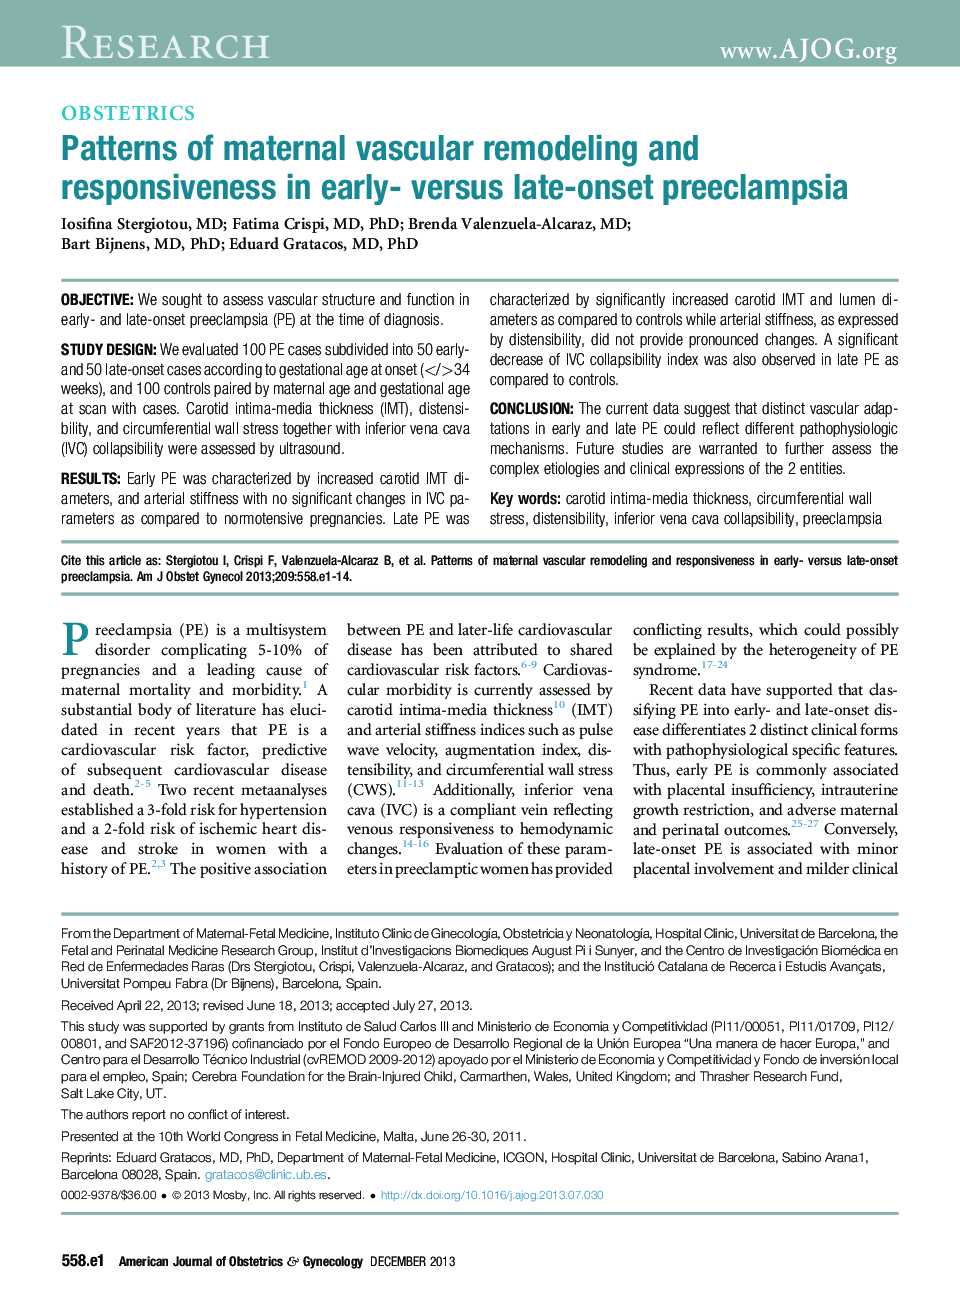 Patterns of maternal vascular remodeling and responsiveness in early- versus late-onset preeclampsia